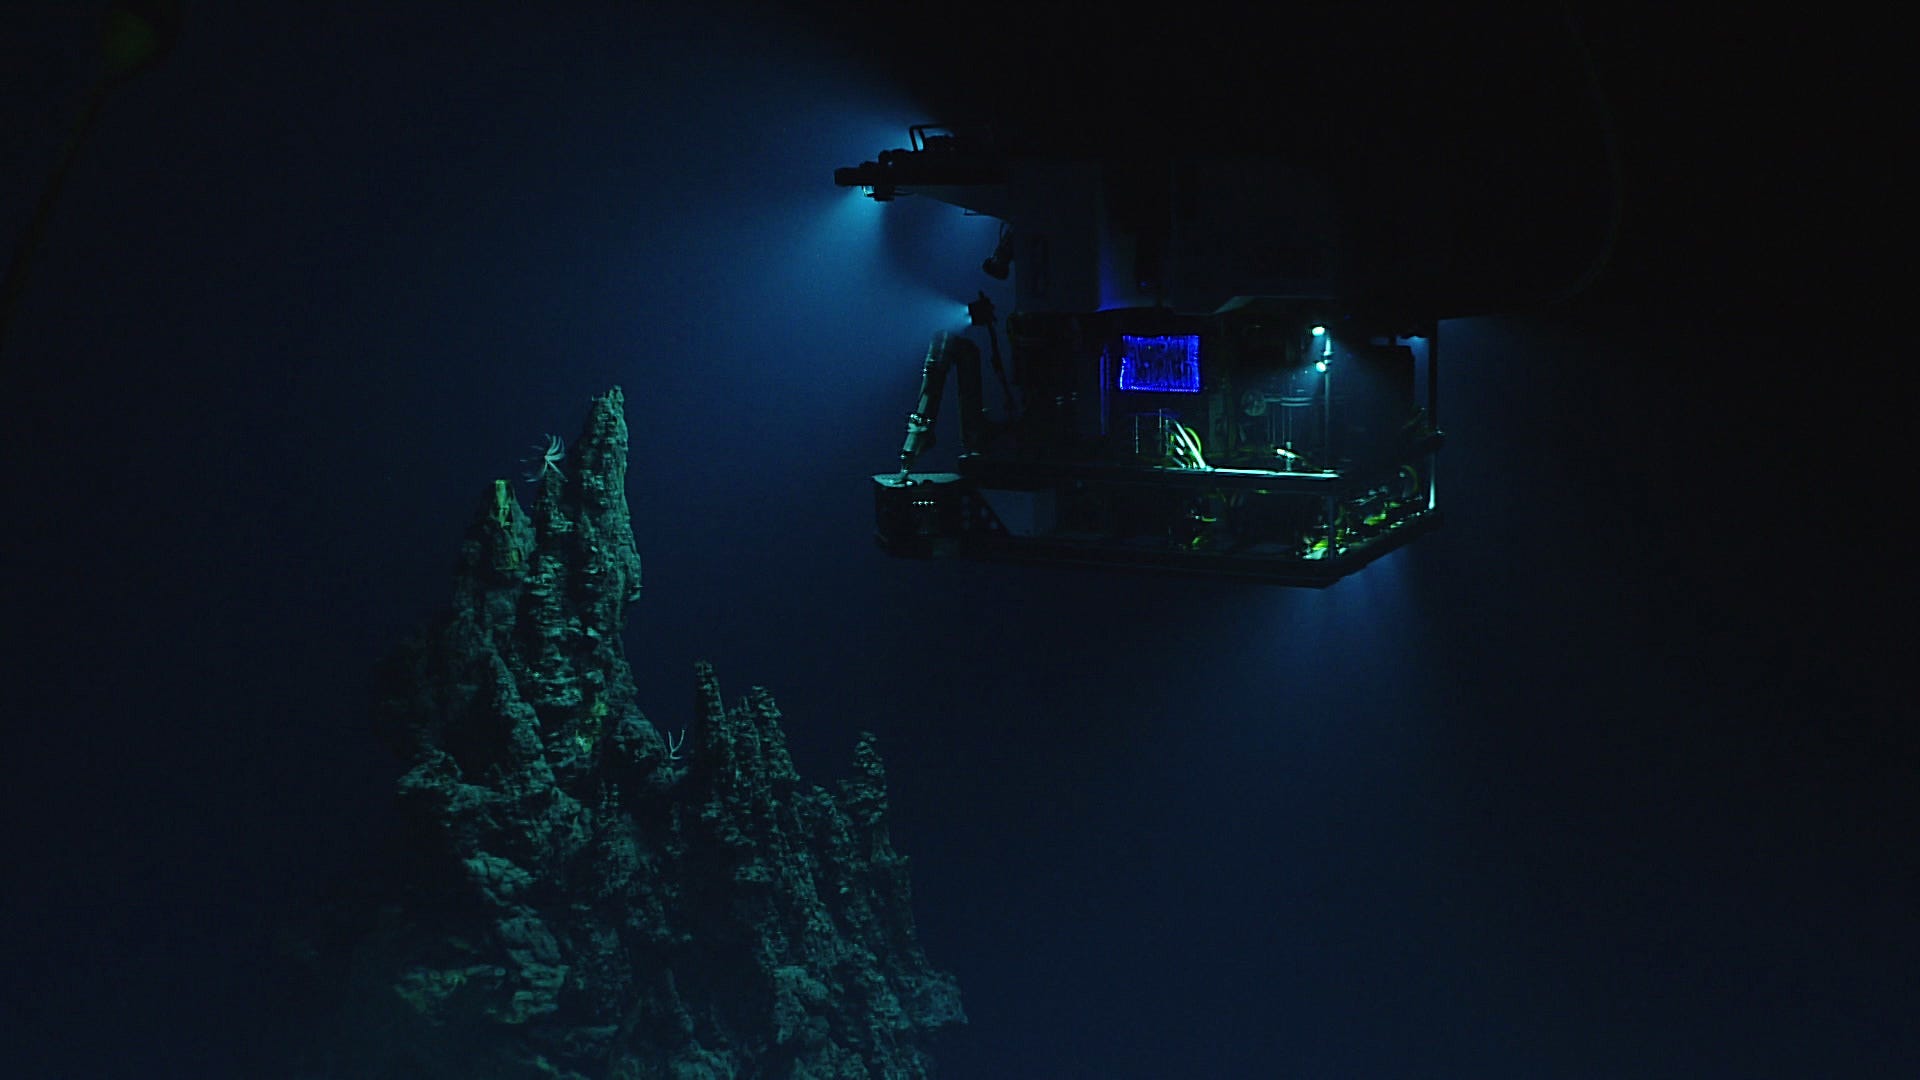 This April 28, 2016 image made available by NOAA shows the remotely operated vehicle Deep Discoverer surveying a 14-meter (46-foot) hydrothermal chimney during a deepwater exploration of the Marianas Trench Marine National Monument area in the Pacific Ocean near Guam and Saipan. Dives in the expedition ranged from 250 to 6,000 meters (820 feet to 3.7 miles) deep.